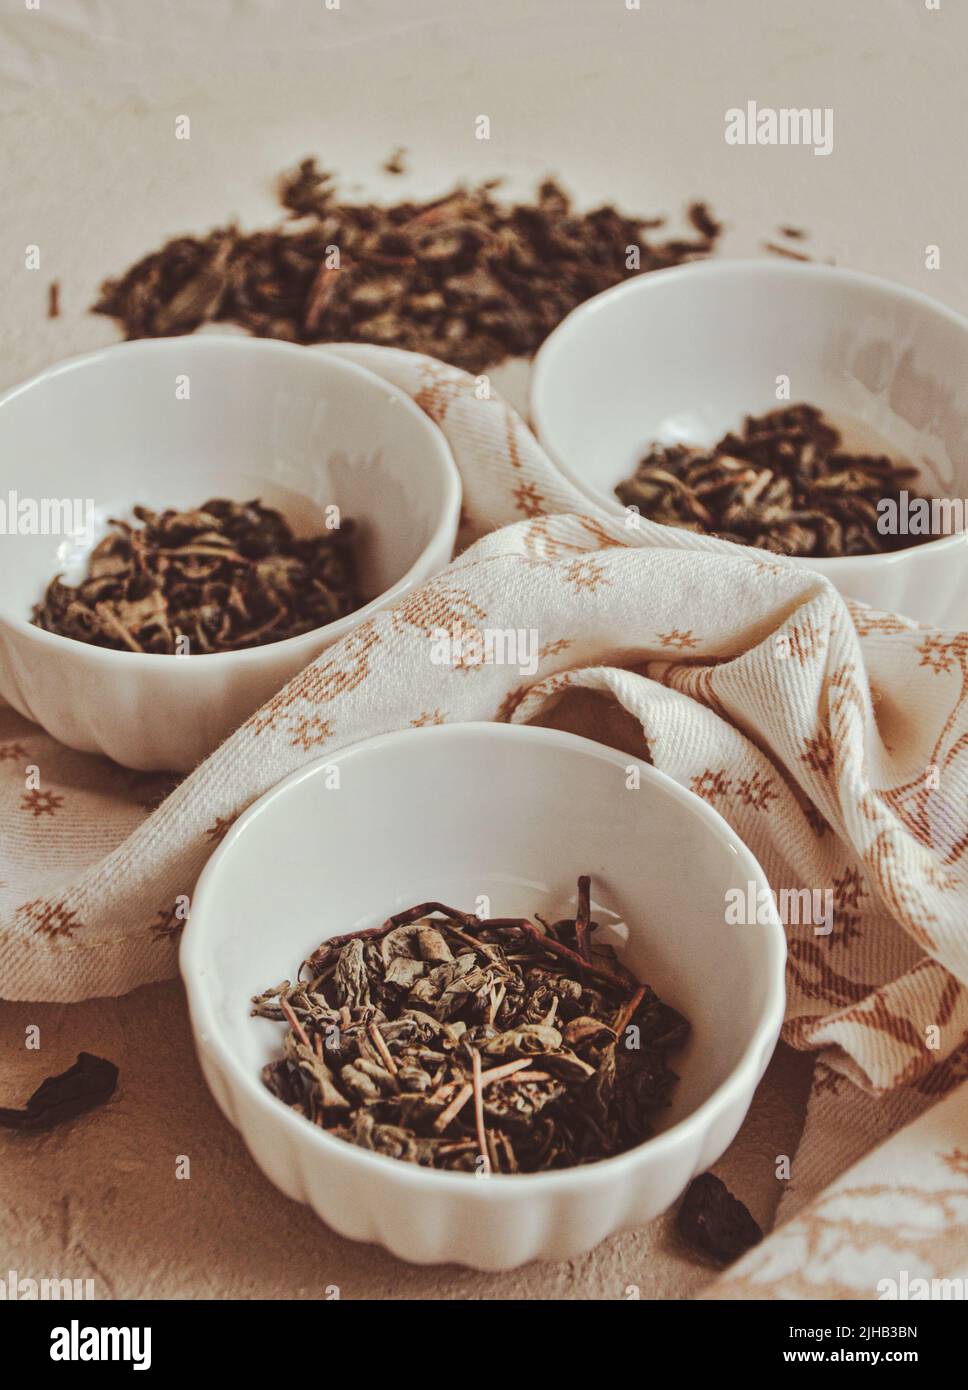 Small bowls with dried healing green tea and herbs, ritual purification and cleansing, closeup Stock Photo